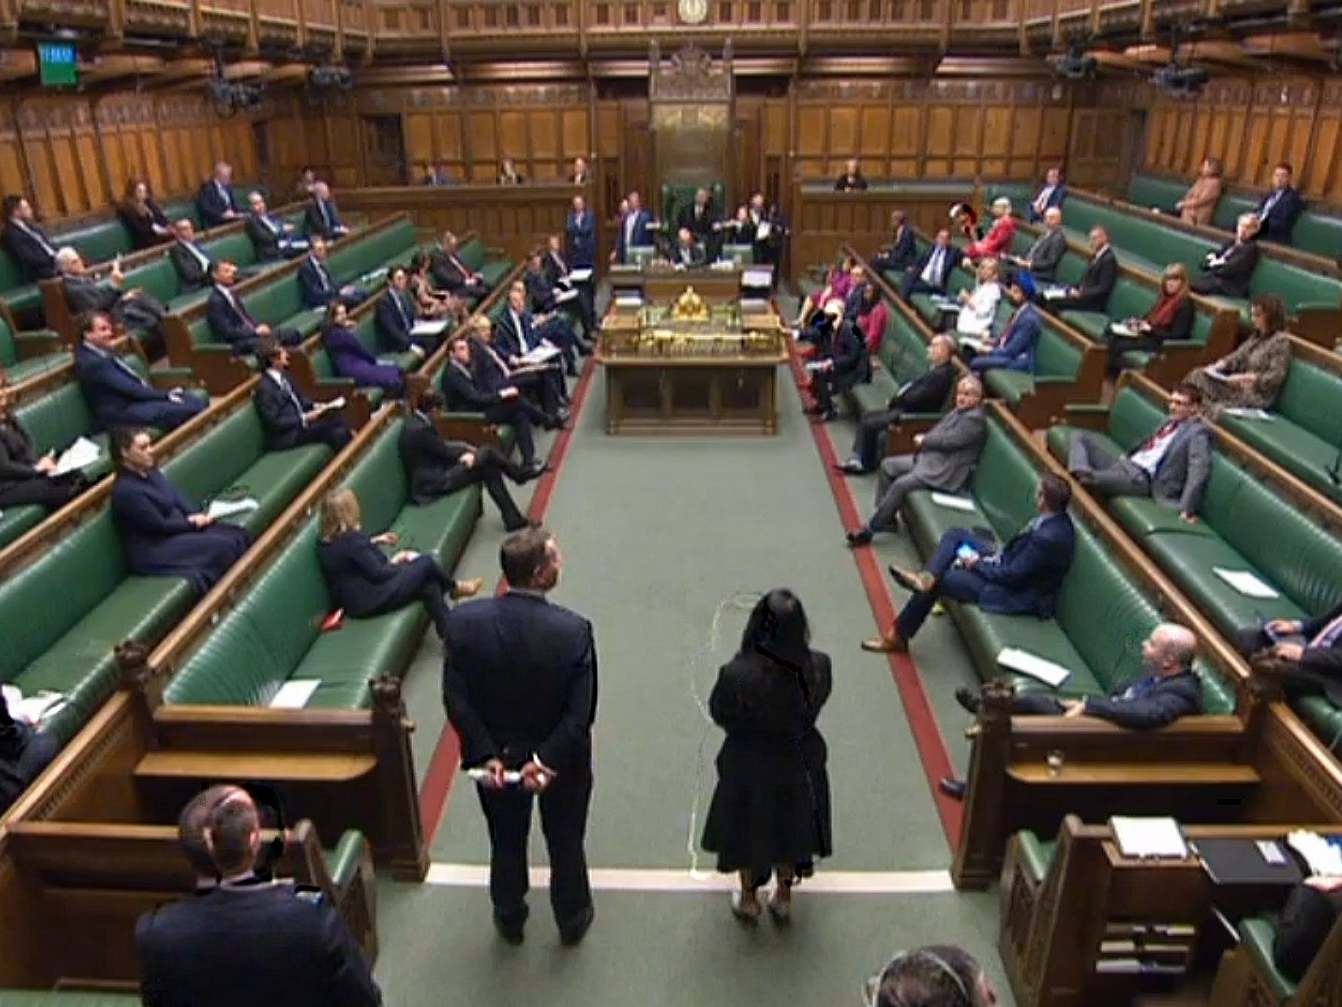 MPs in the Commons on the day parliament rose early for Easter recess